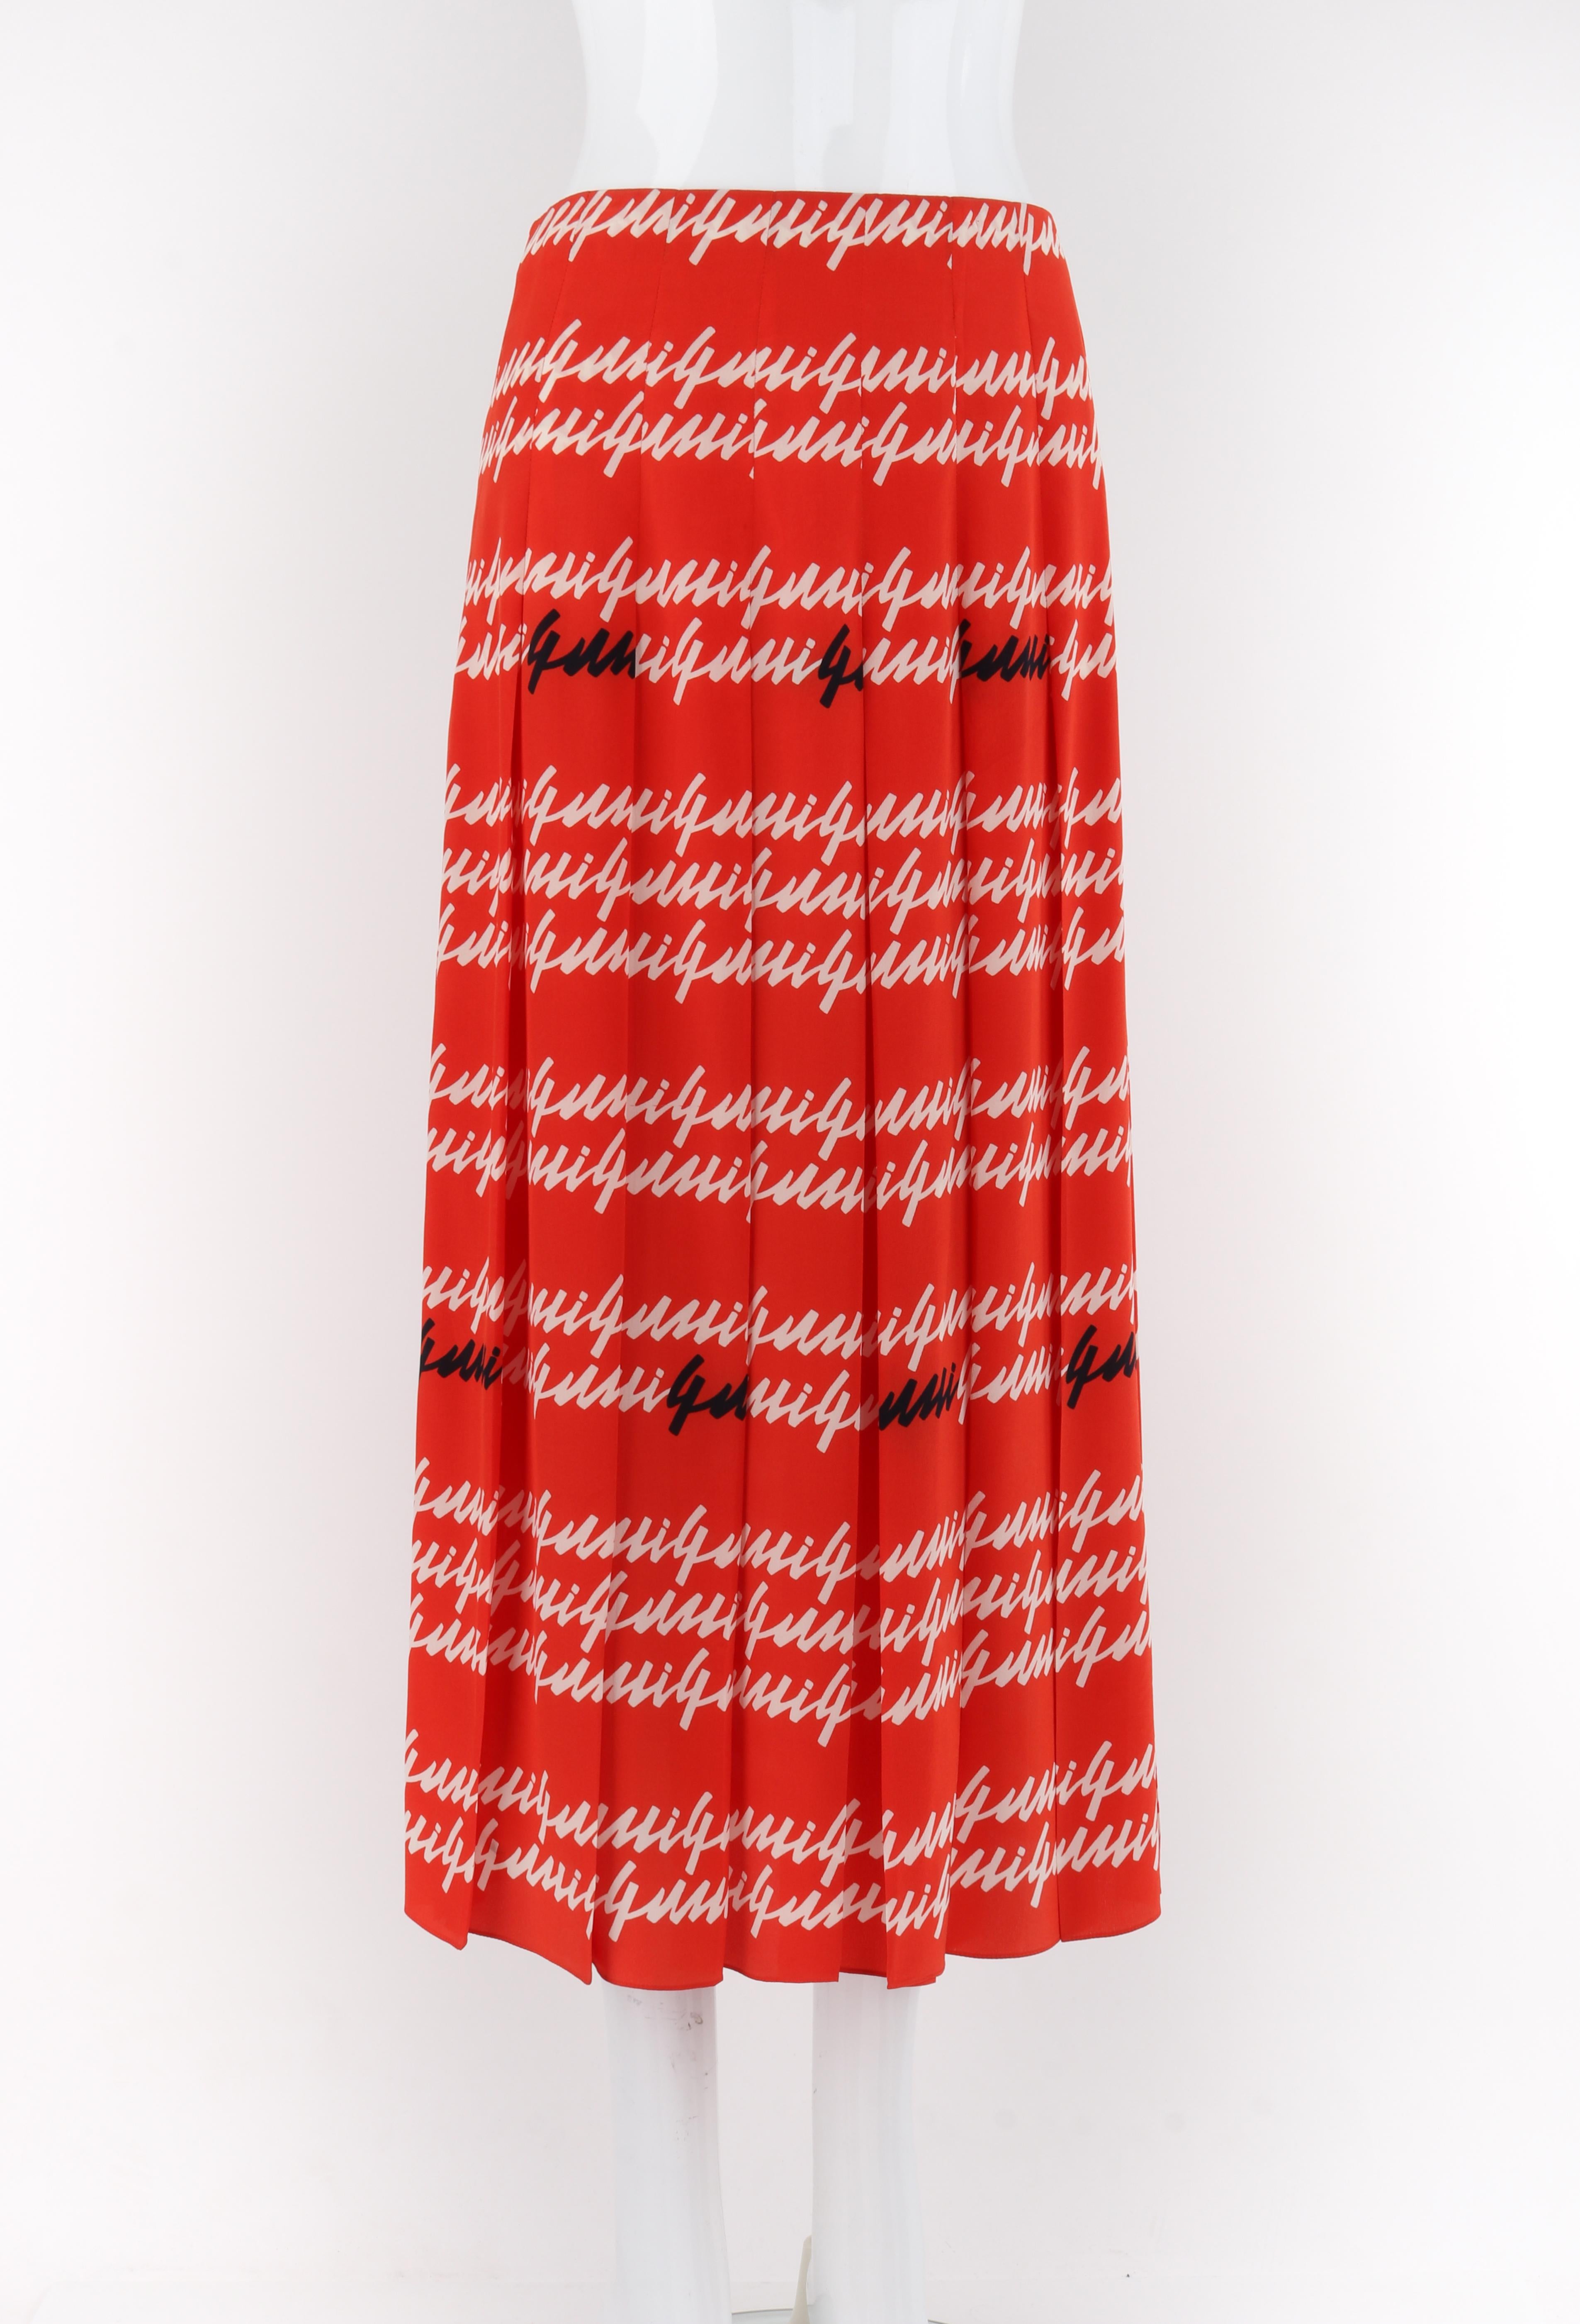 GUCCI S/S 2016 Orange Black White Pleated Silk Scripture Print Maxi Skirt In Good Condition For Sale In Thiensville, WI